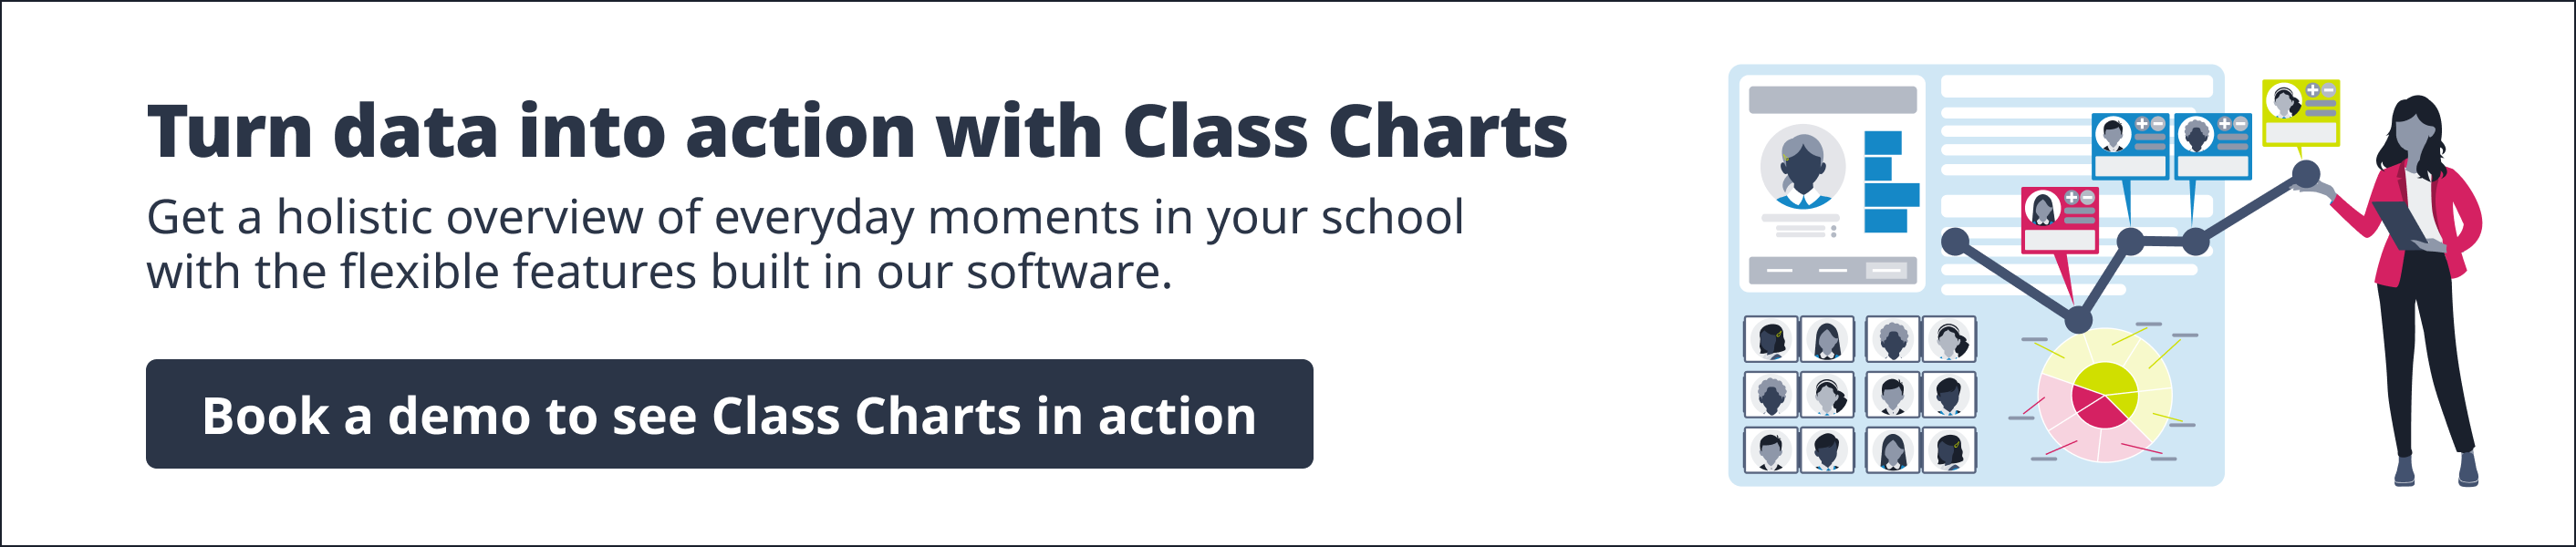 Turn data into action with Class Charts